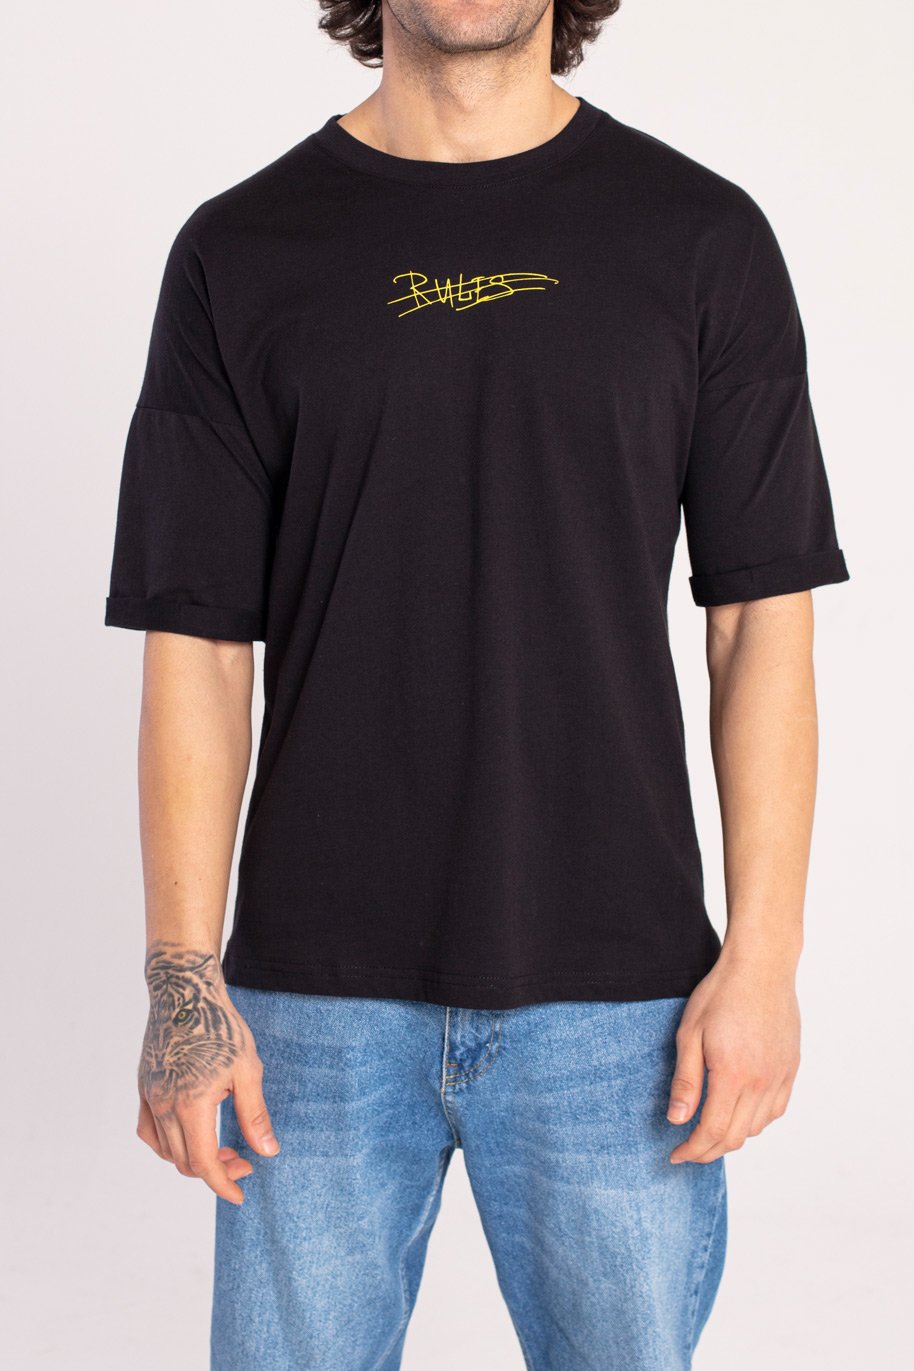 T-SHIRT OVERSIZE “RULES“ - COLORE NERO